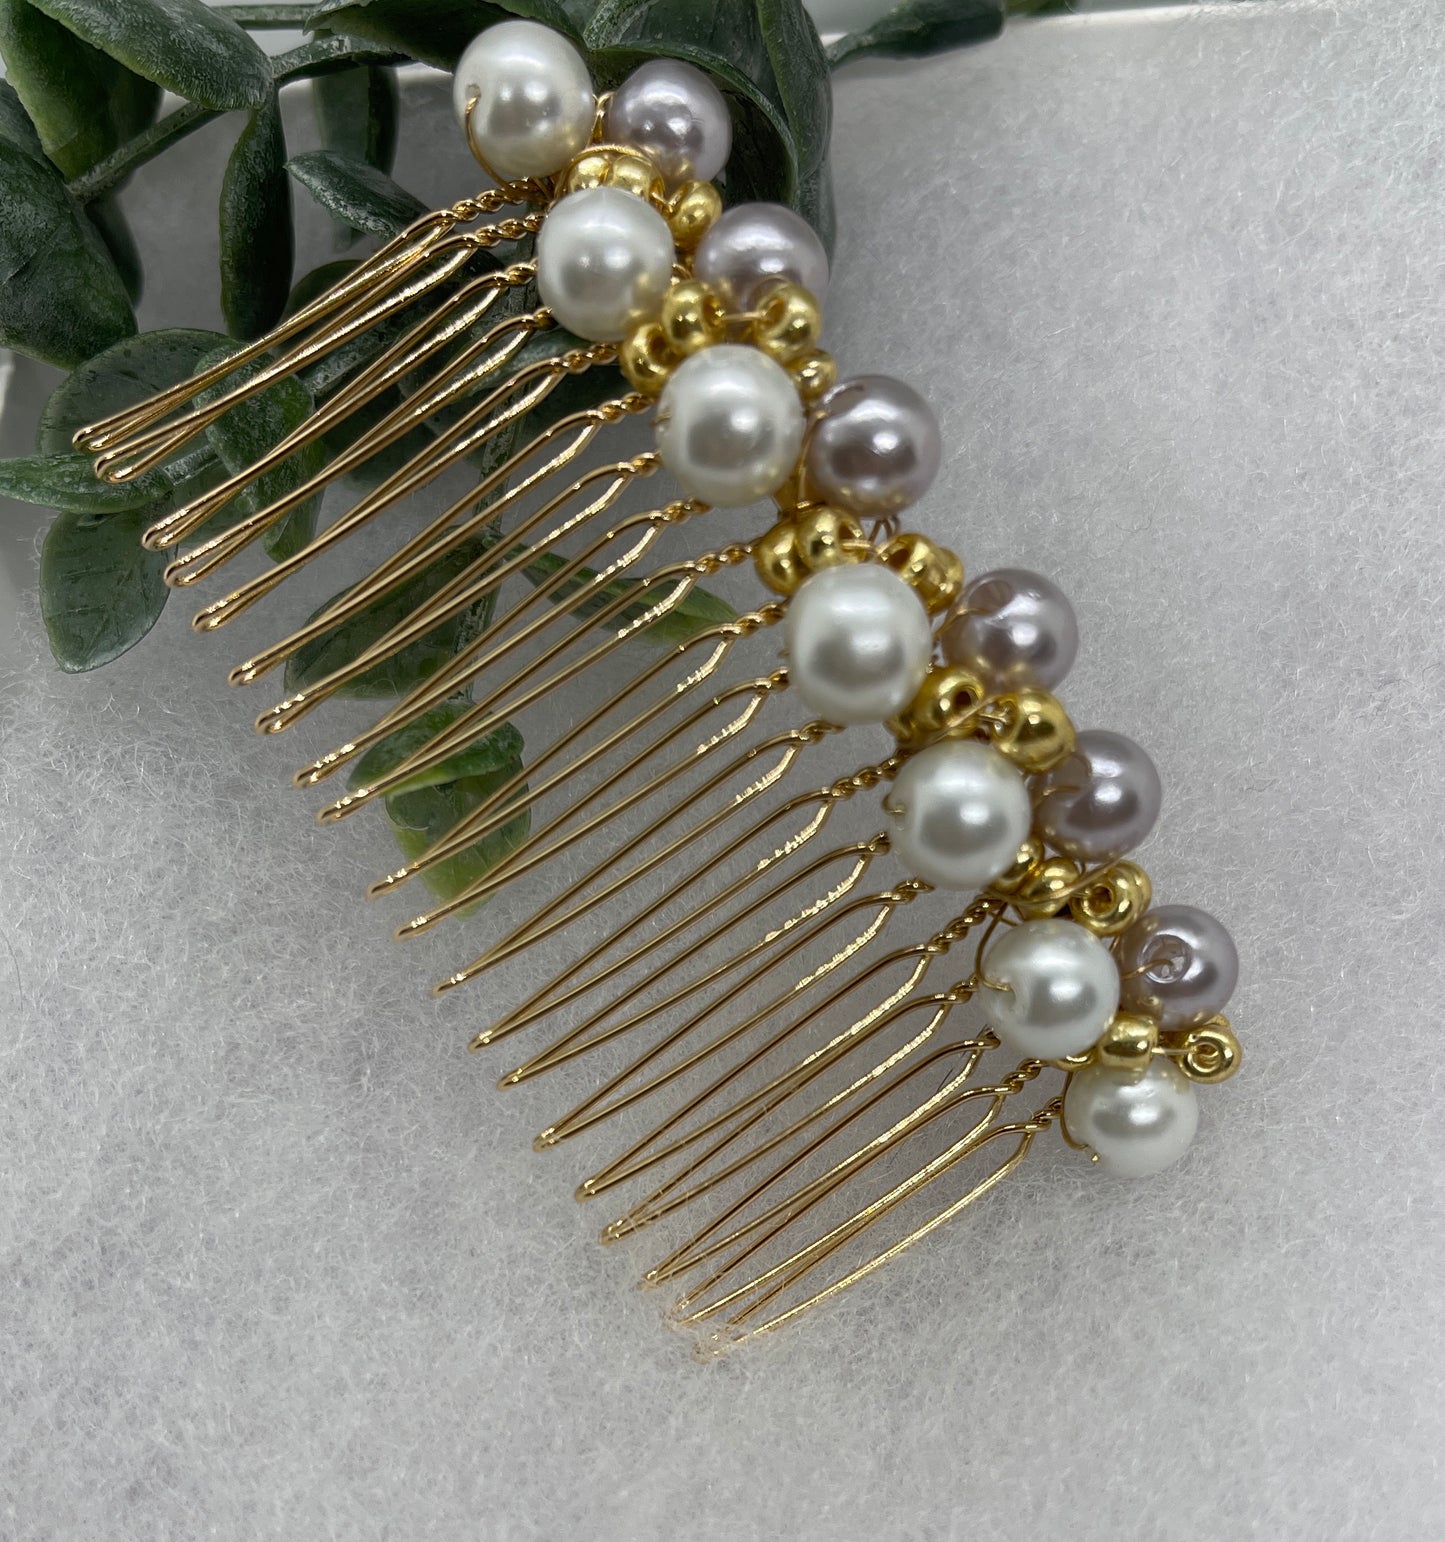 Lavender White  gold beaded side Comb 3.5” gold Metal hair Accessories bridesmaid birthday princess wedding gift handmade accessories